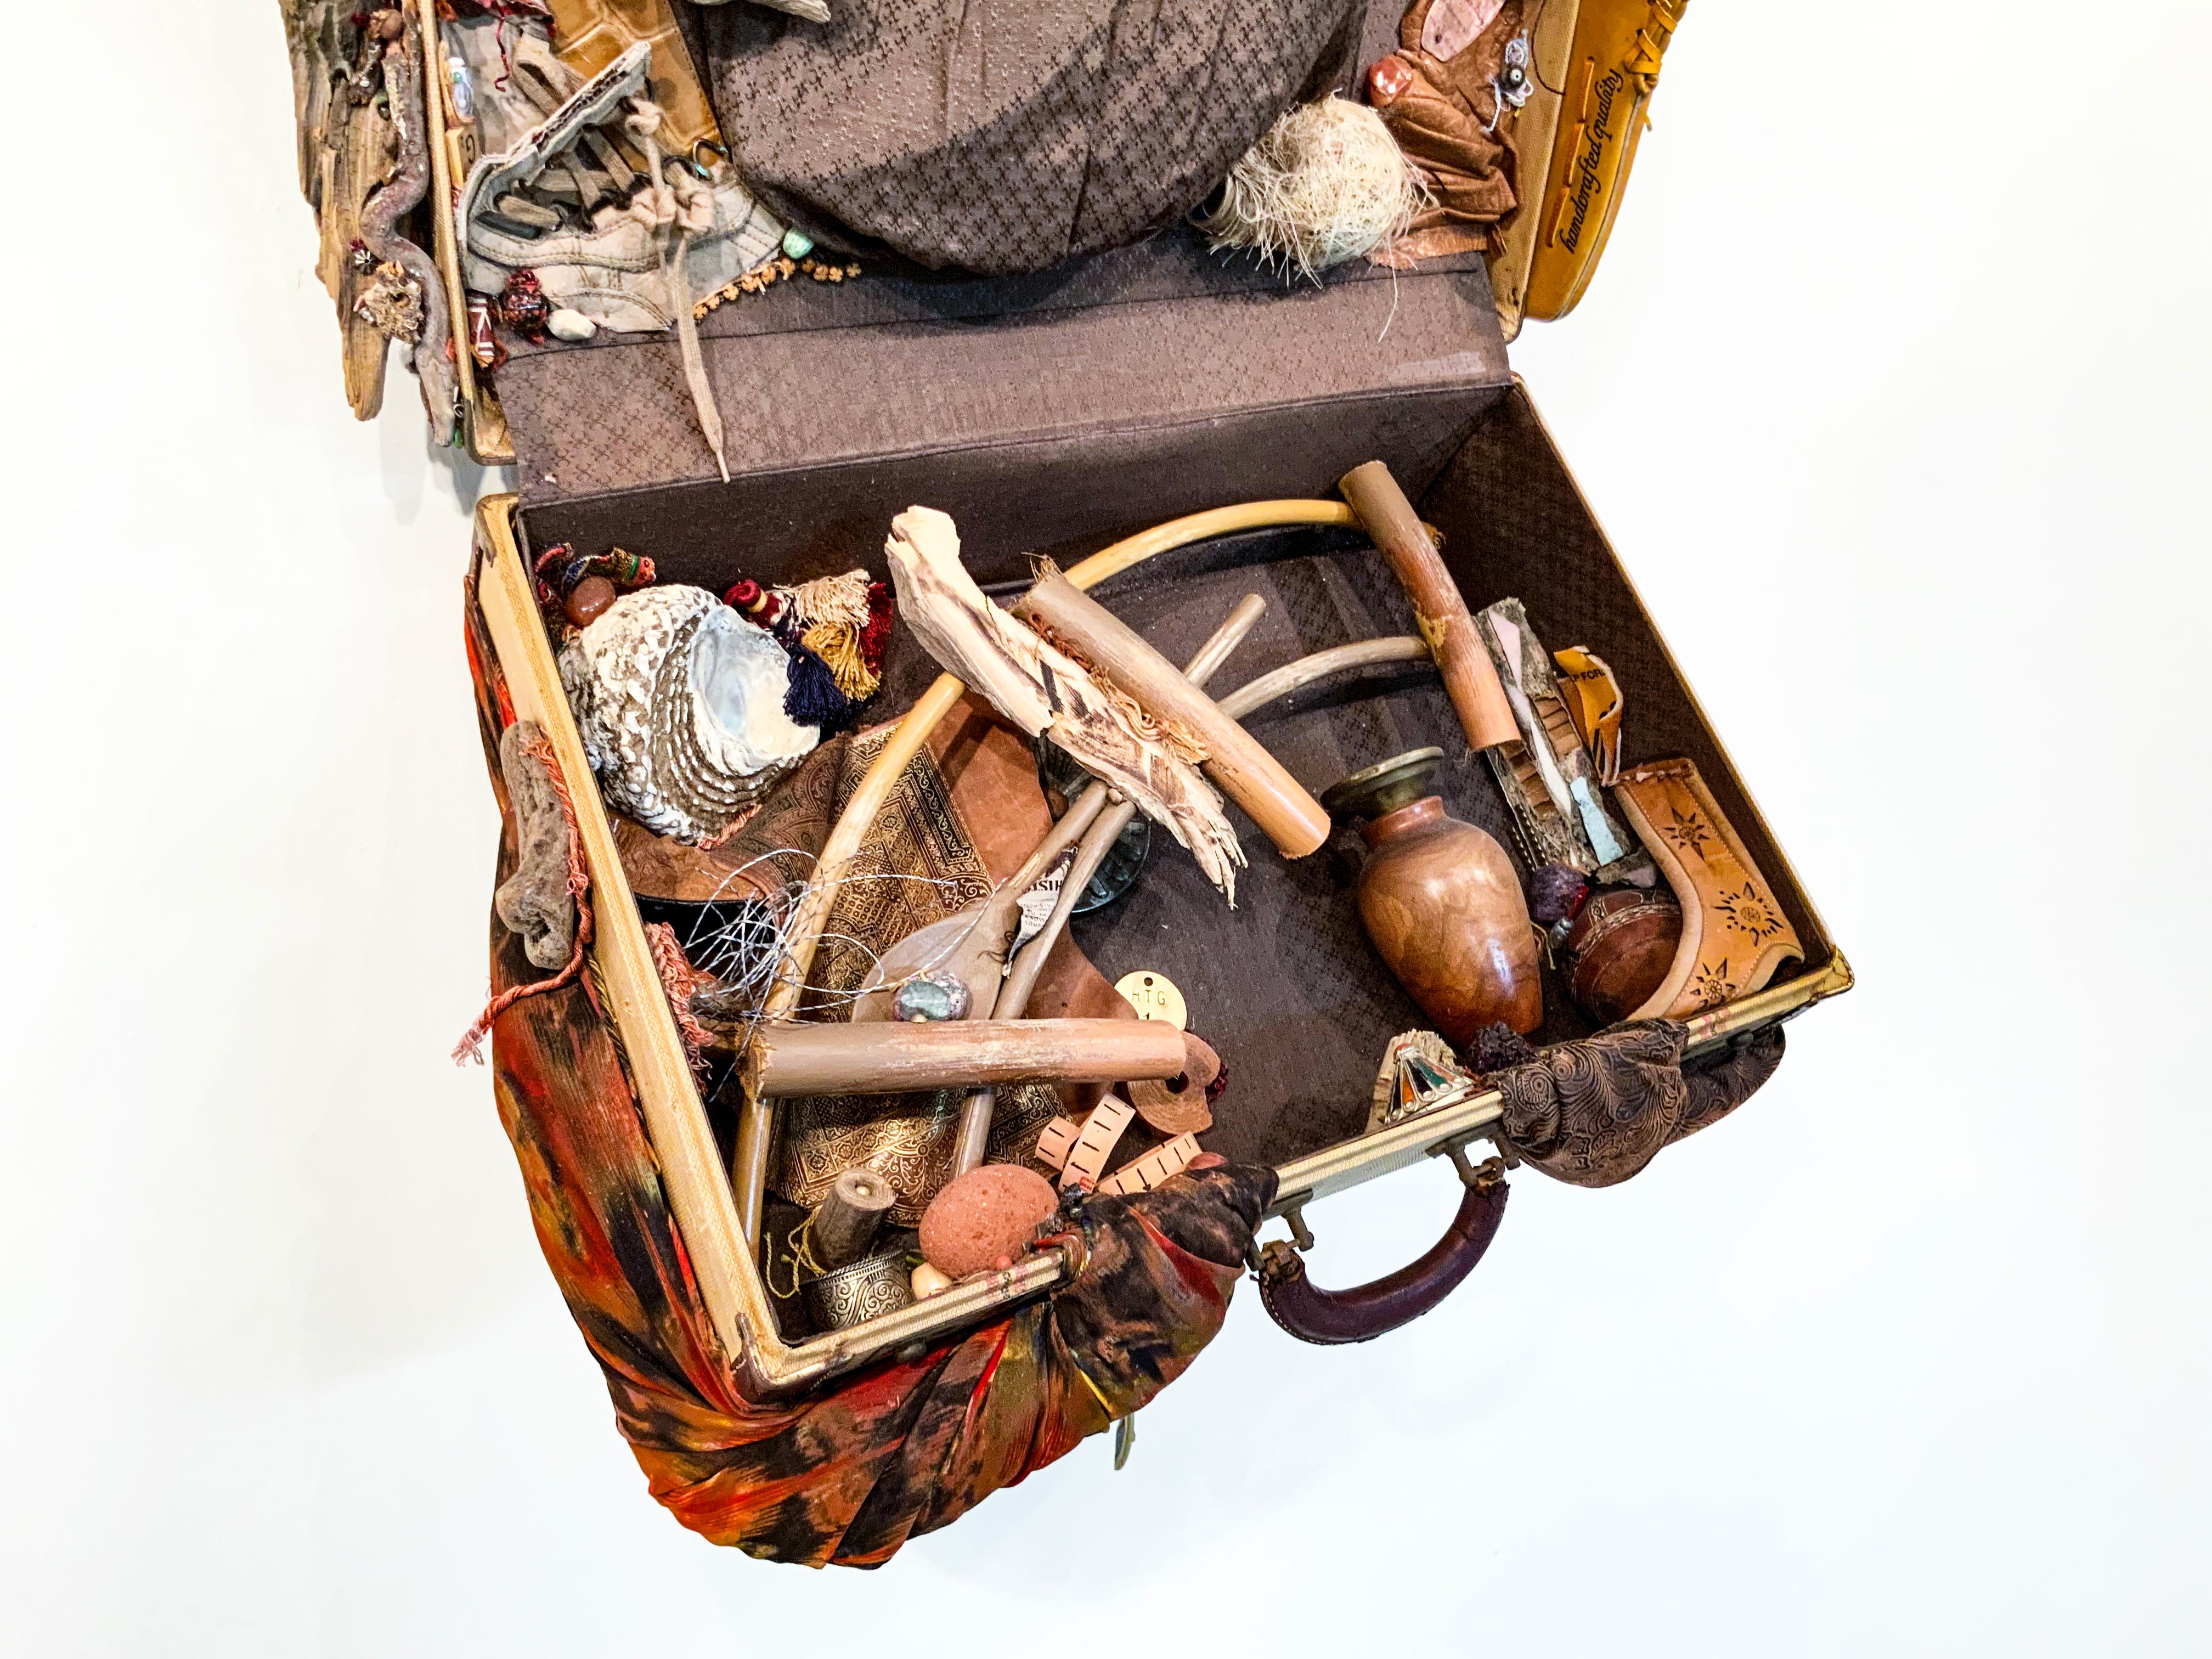 This work from Linda Stein's Displacement From Home series draws from the tradition of wunderkammer/cabinets of curiosities to highlight the global displacement and traumatic memory of migrants and refugees around the world. 

The sculpture is made